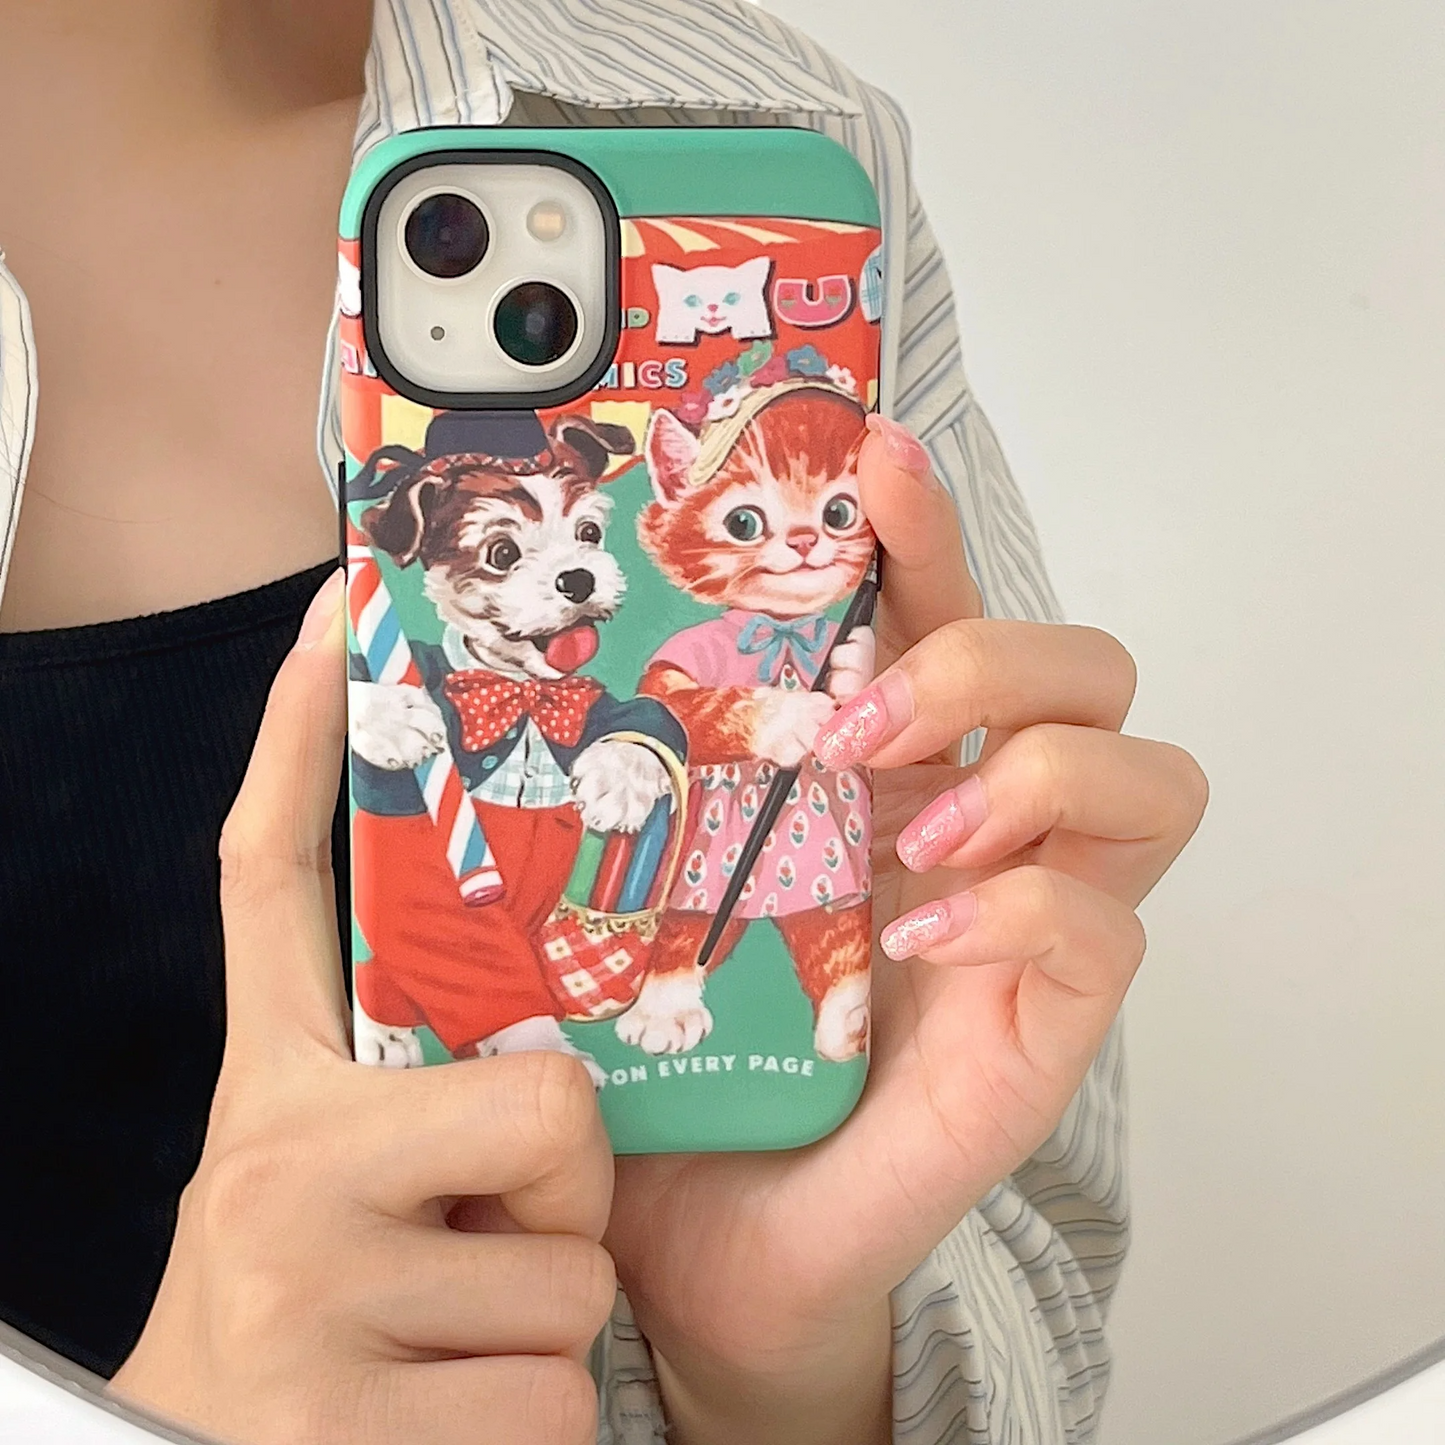 Cute green and red iPhone cover featuring a nostalgic retro children's book style illustration of a cat and dog taking a walk.